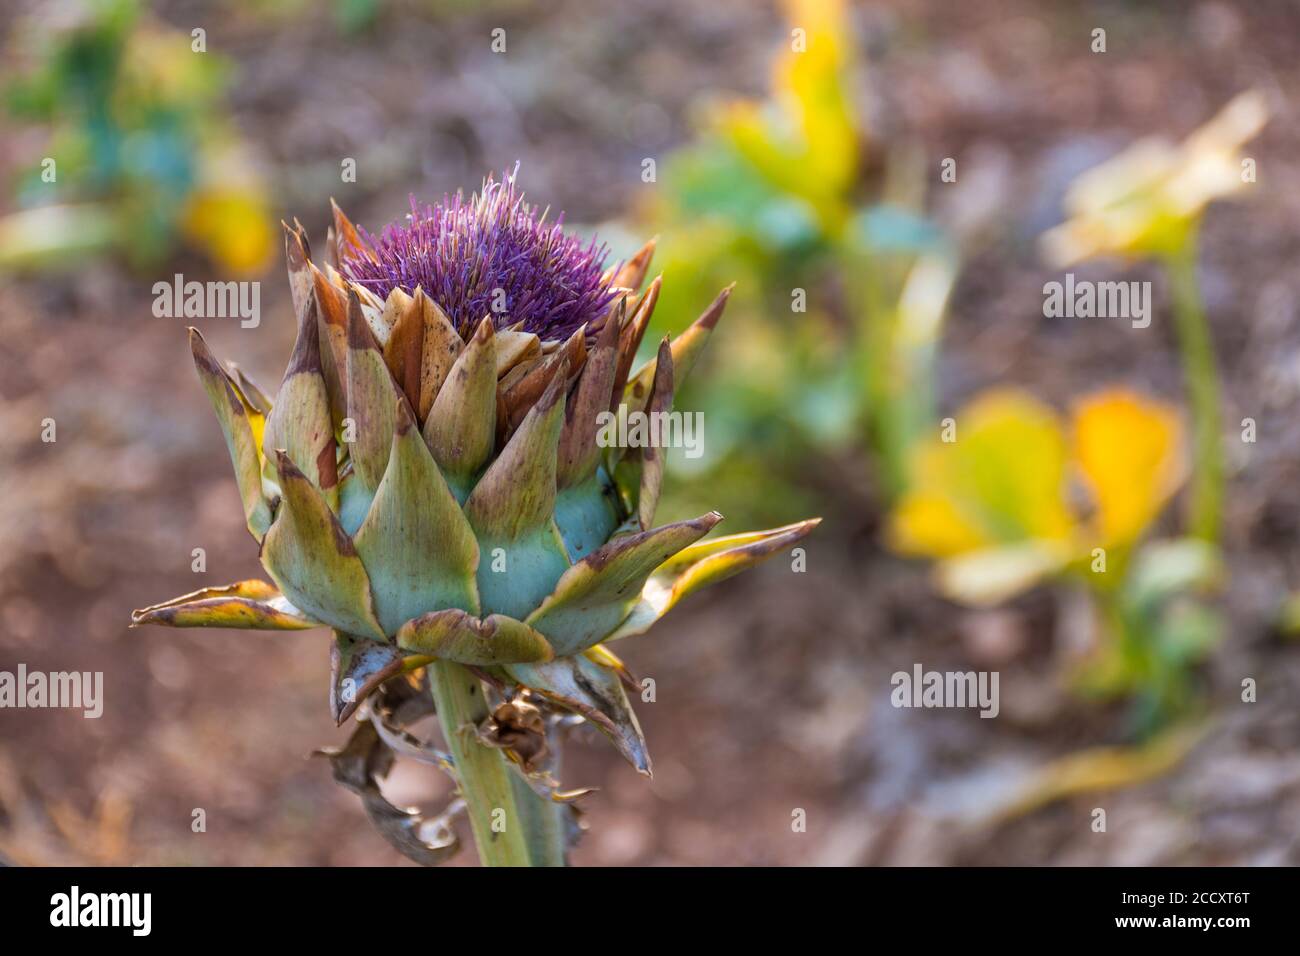 Artichoke head with flower in bloom cultivated in a market garden, close up Stock Photo